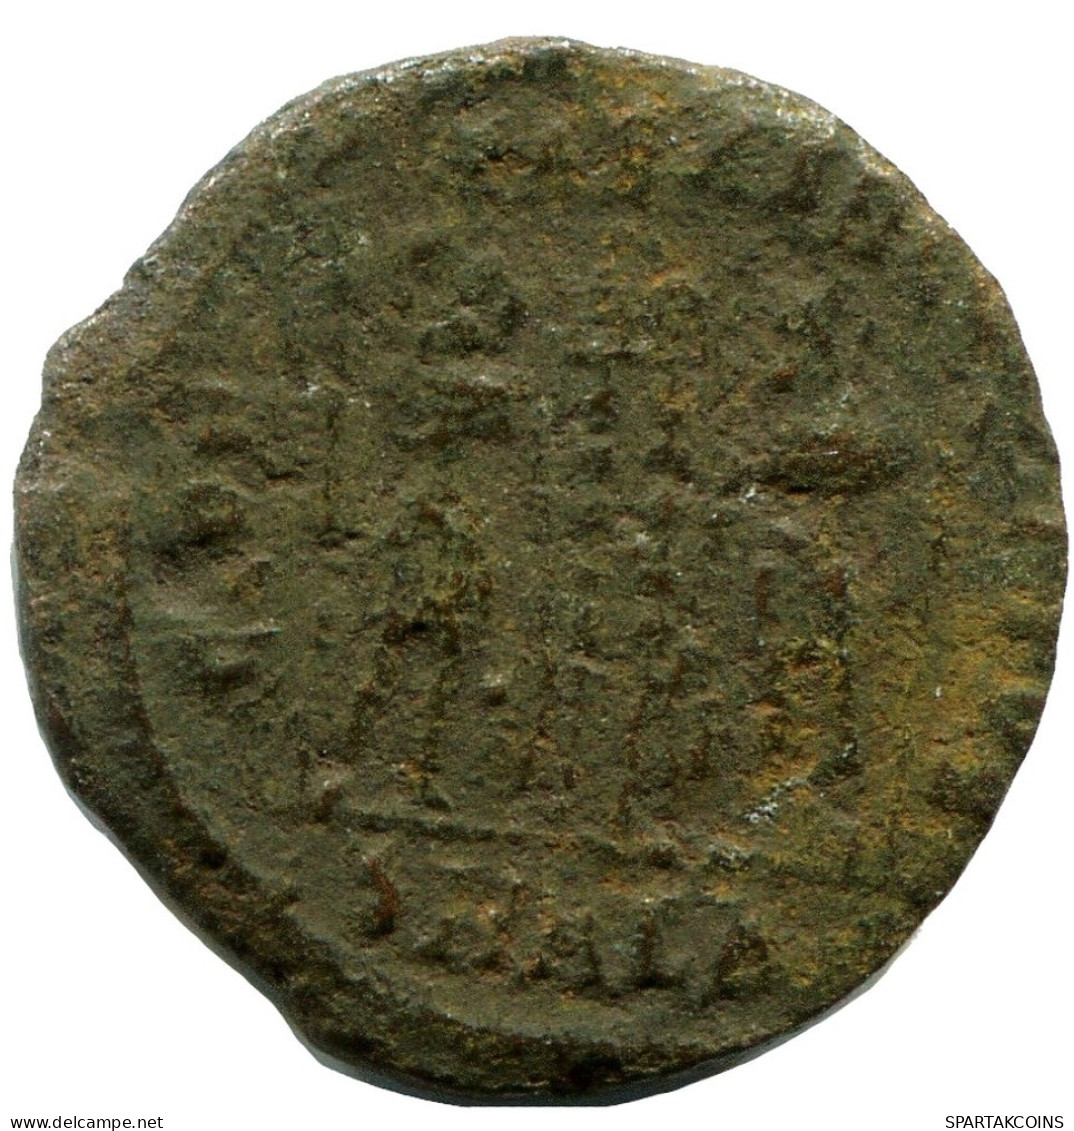 CONSTANS MINTED IN ALEKSANDRIA FOUND IN IHNASYAH HOARD EGYPT #ANC11458.14.F.A - The Christian Empire (307 AD Tot 363 AD)